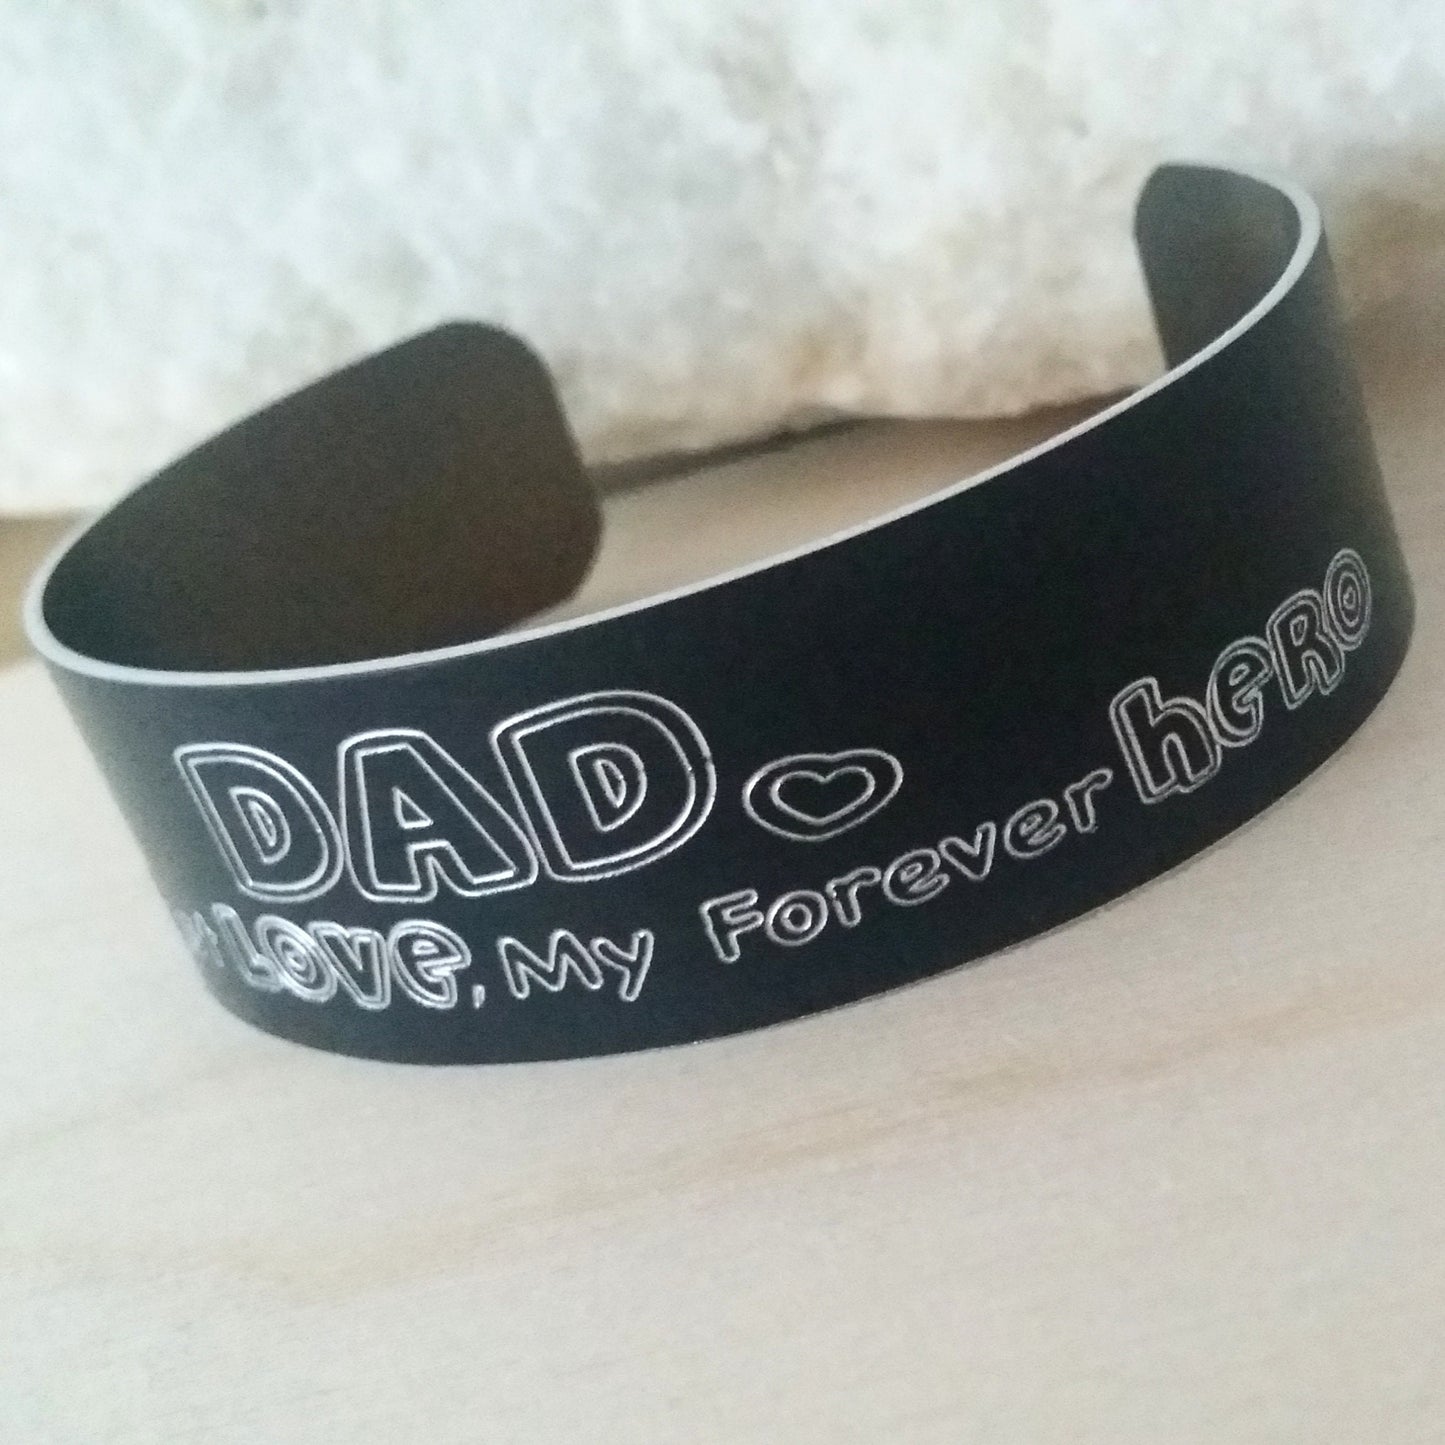 Engrave your own handwriting on black cuff bracelet, Personalized men's gift